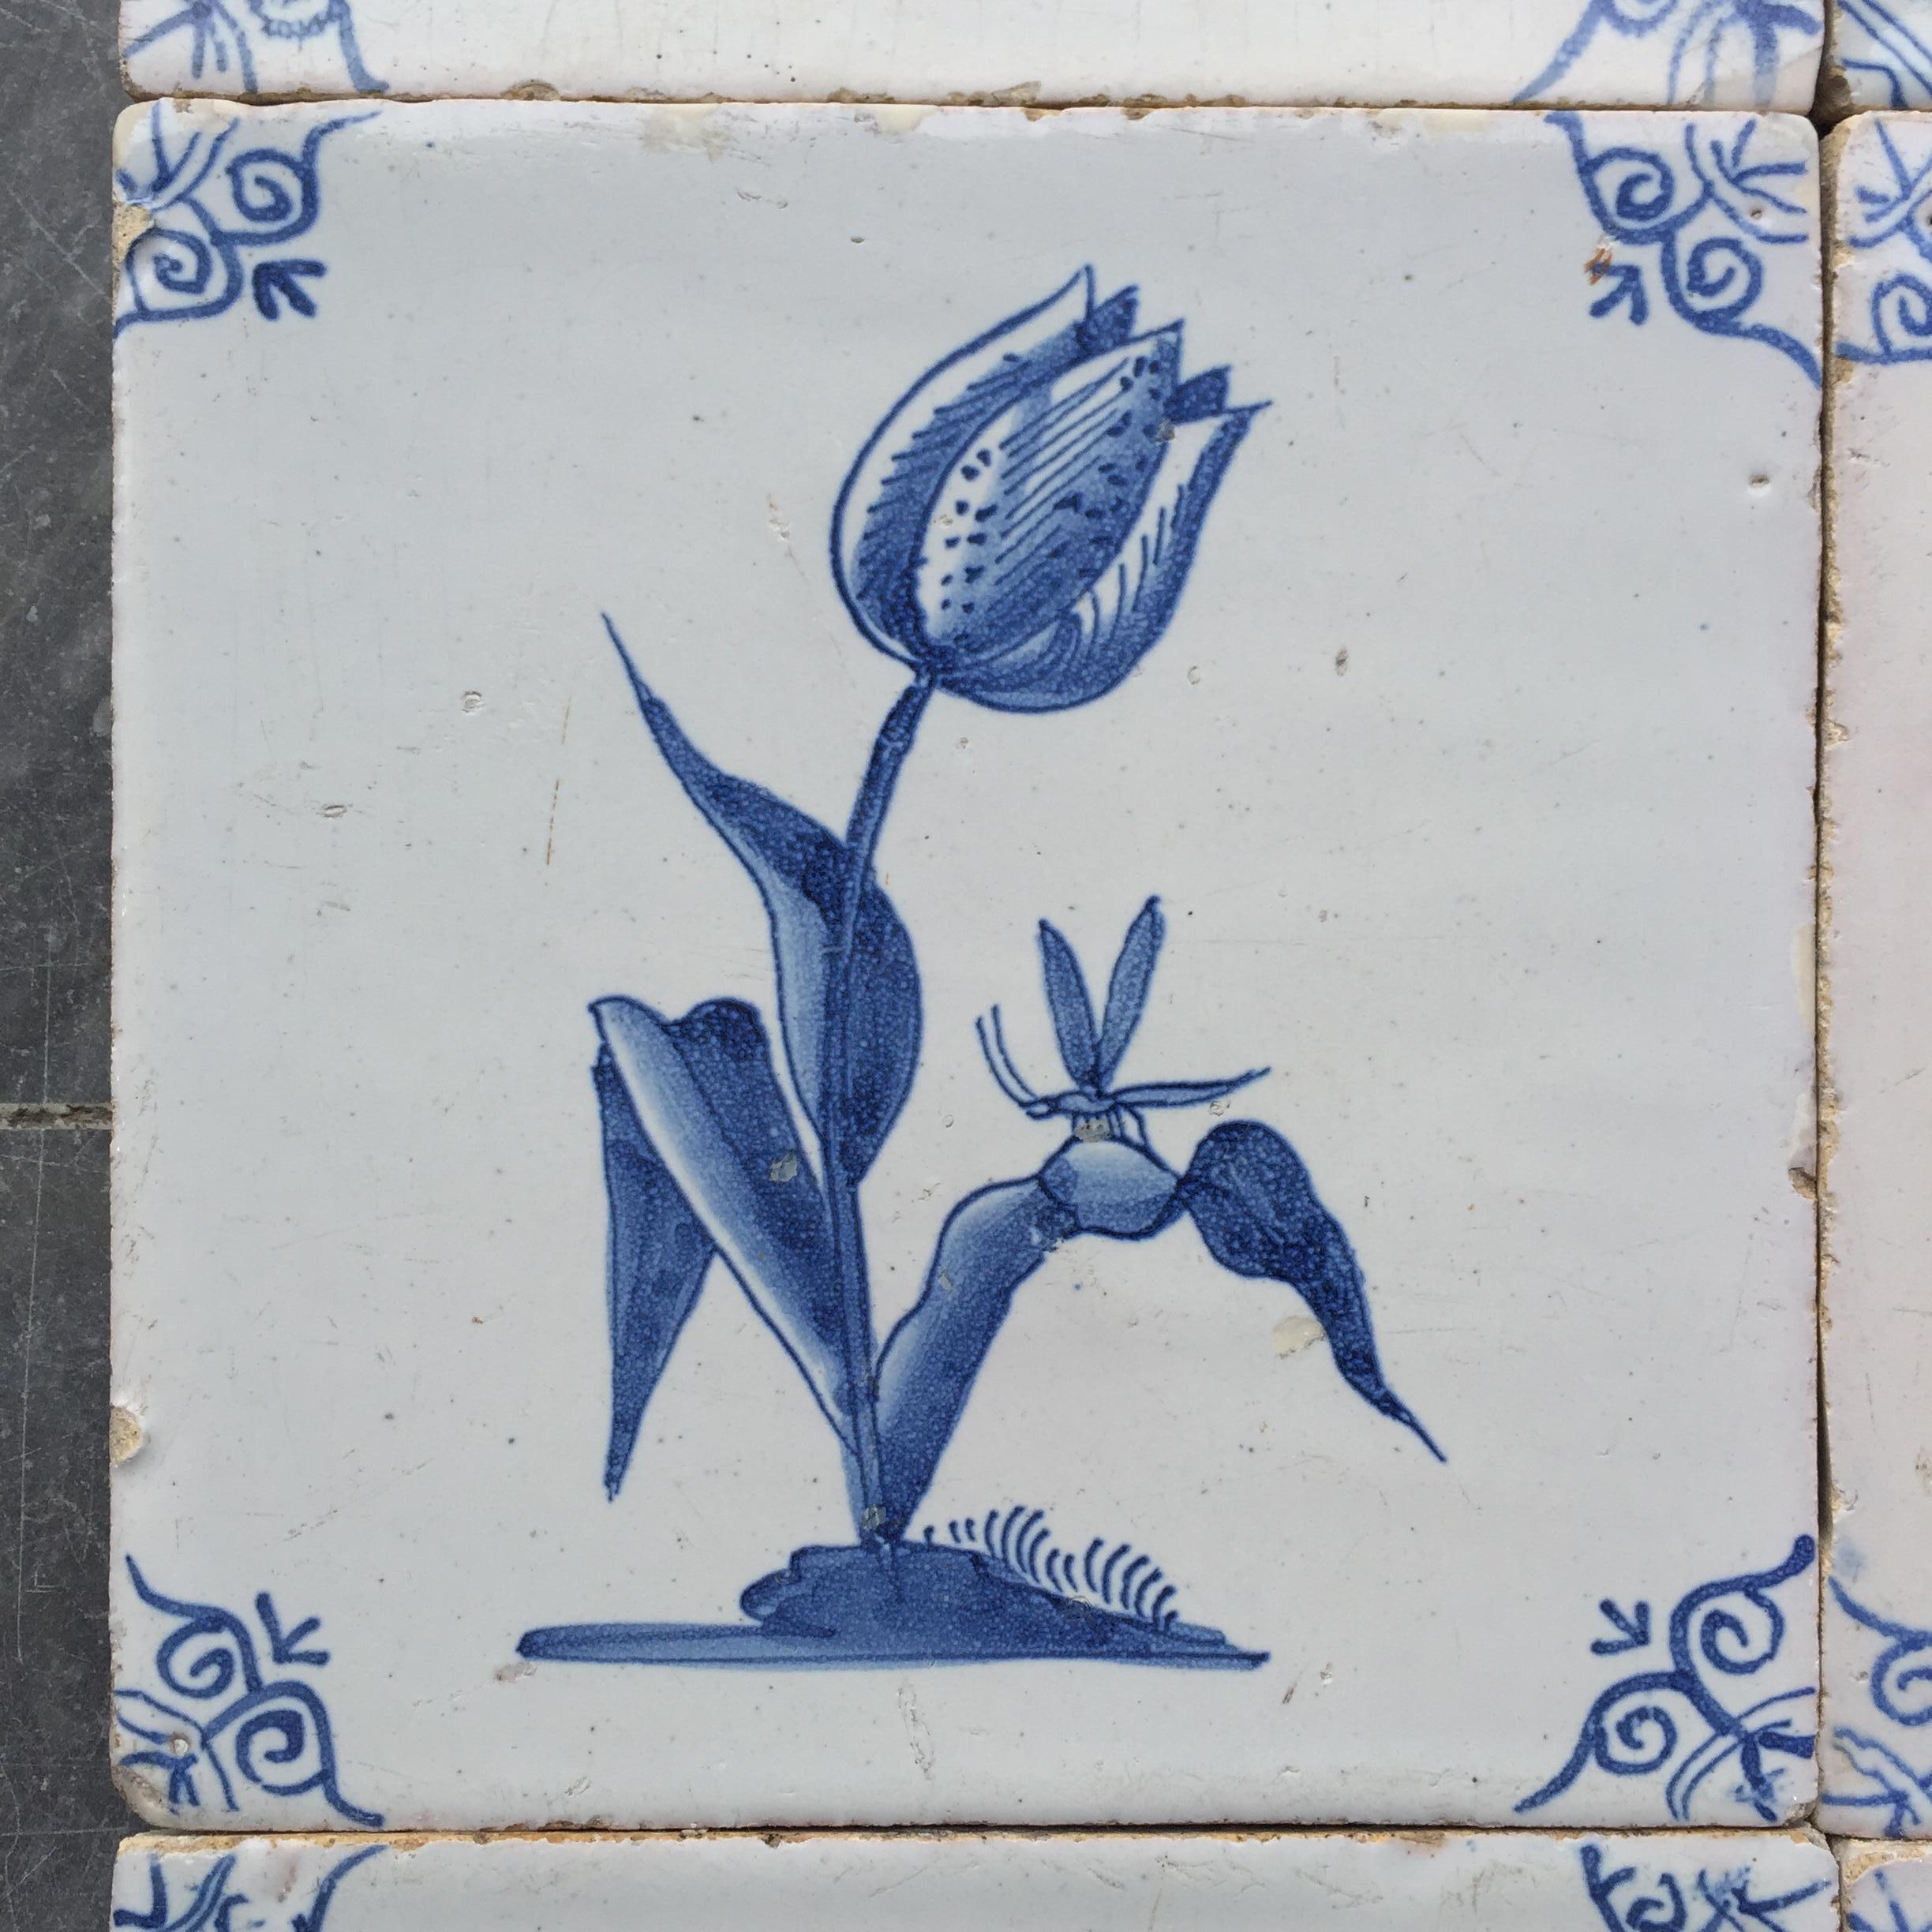 Rare Set of 12 Dutch Delft Tiles with Flowers and Insects, 17th Century 3